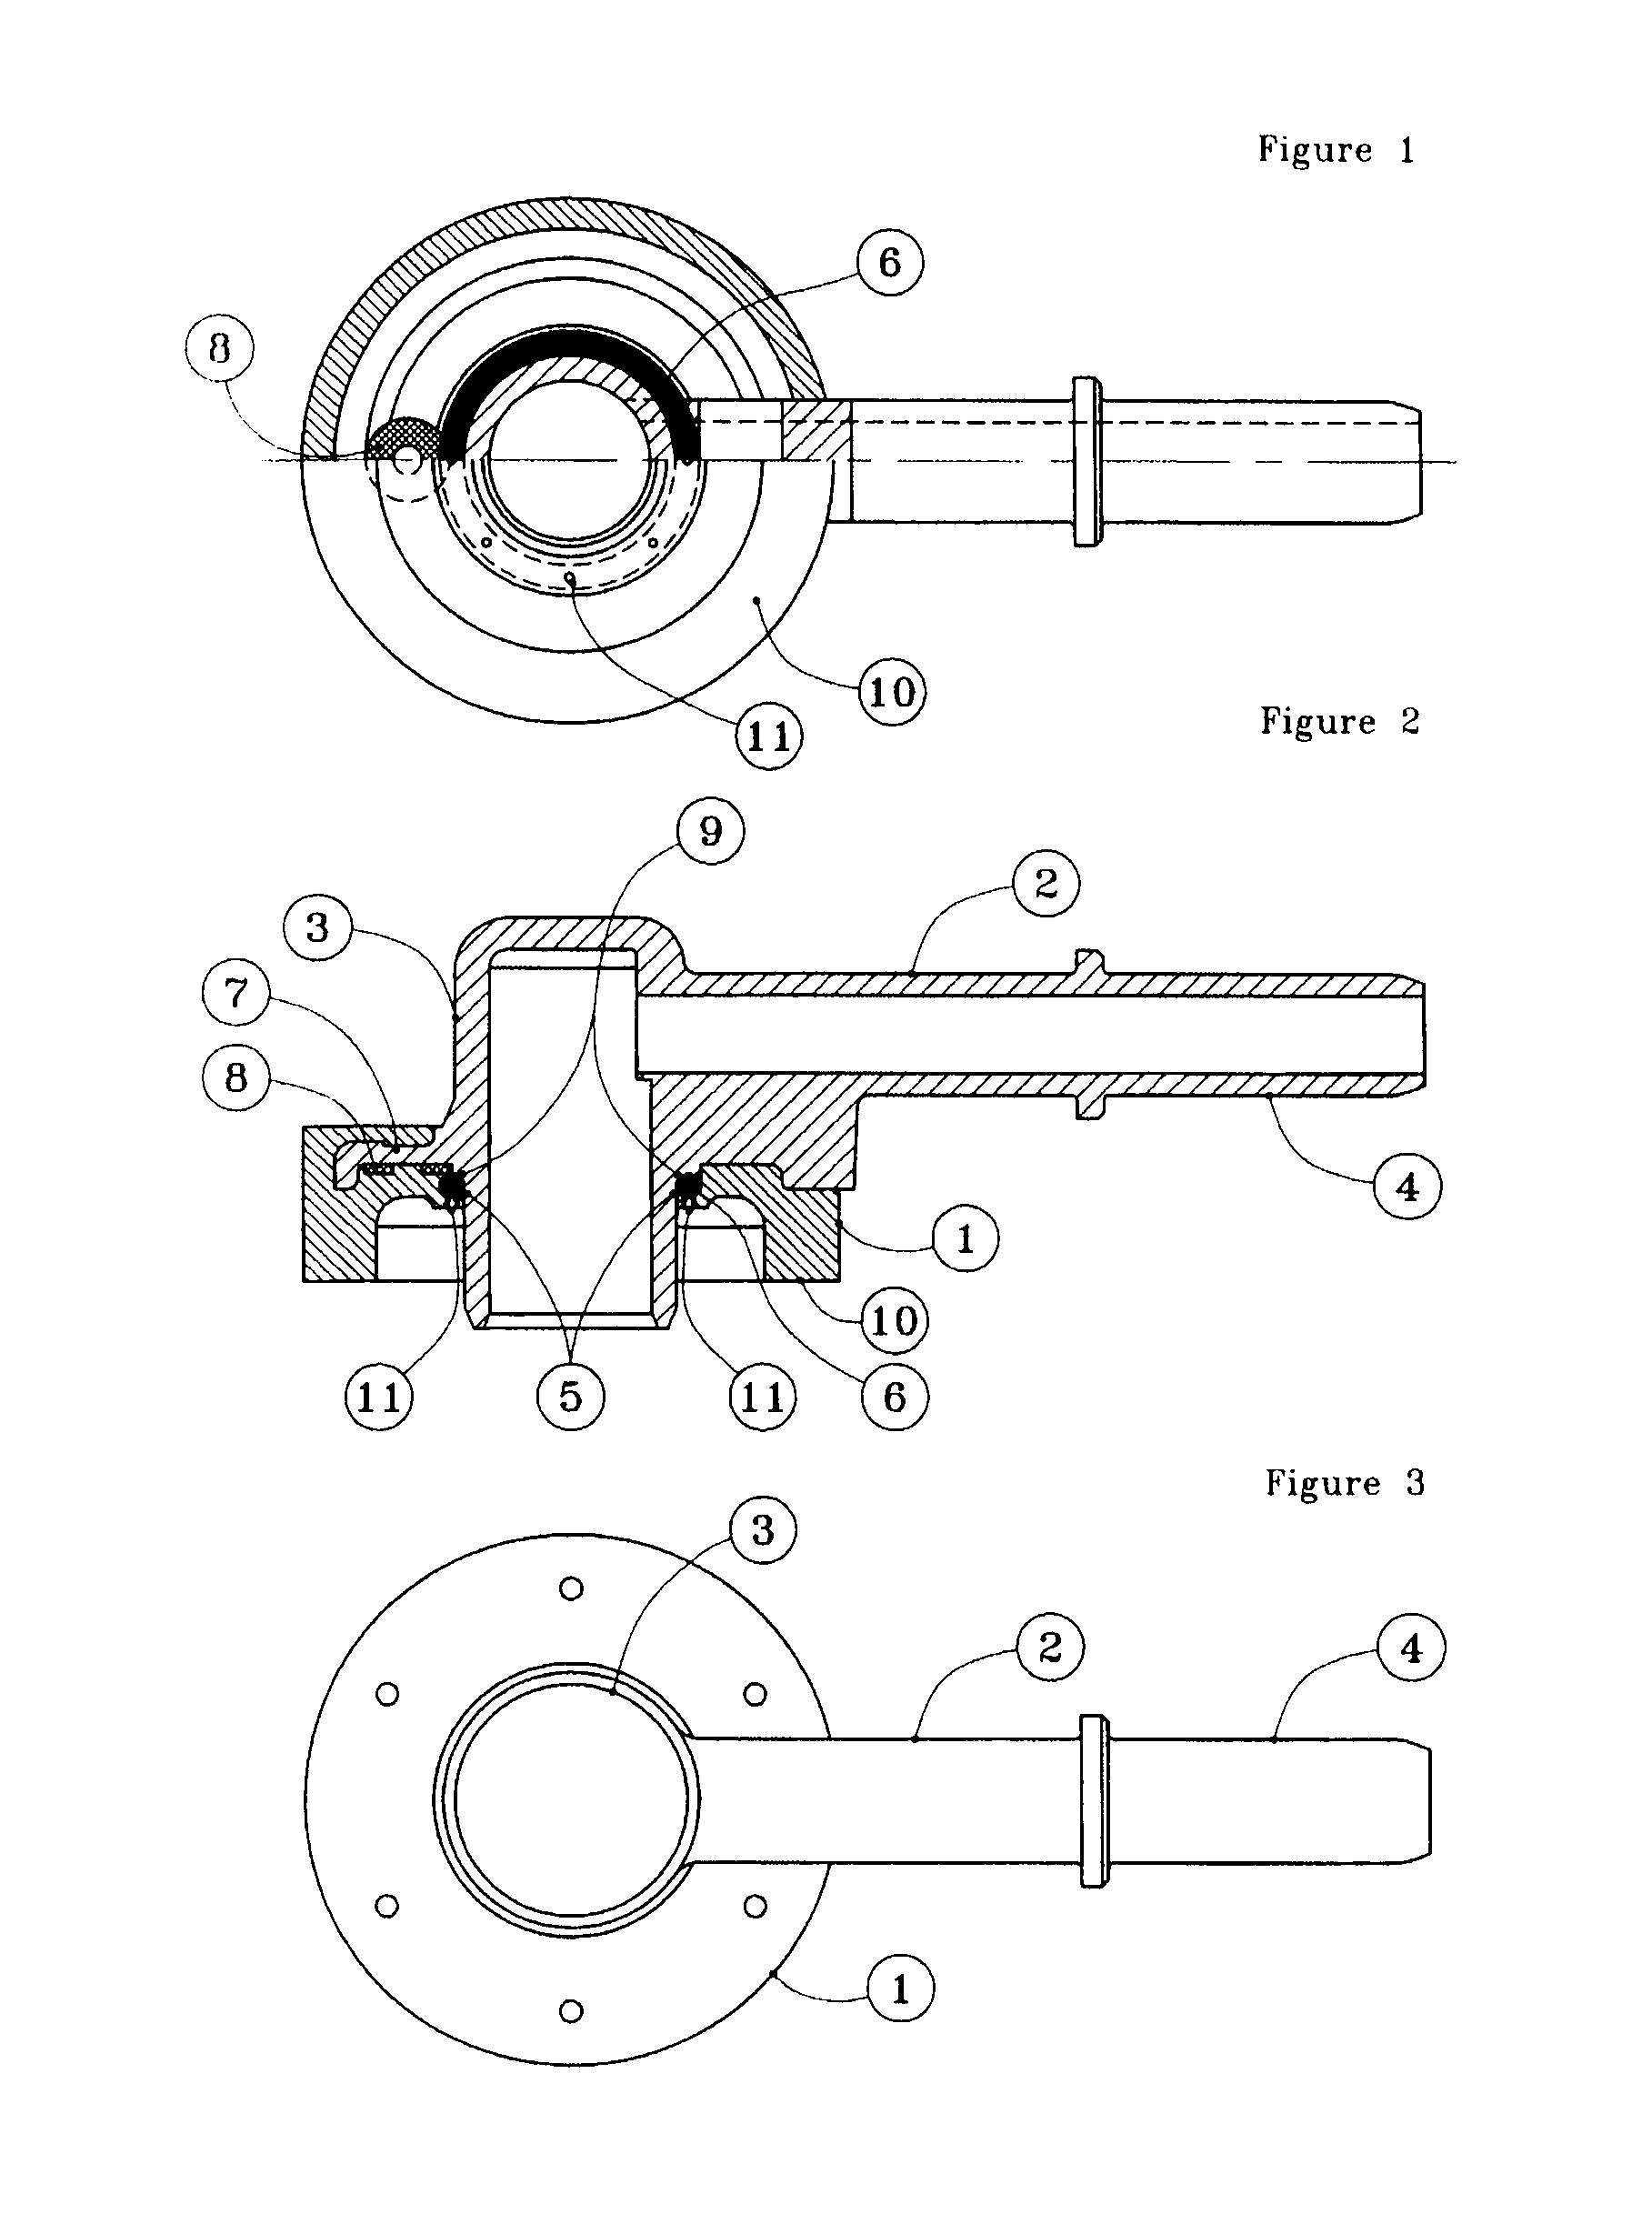 System for supplying an internal combustion engine and method of manufacturing a tank comprised in the system